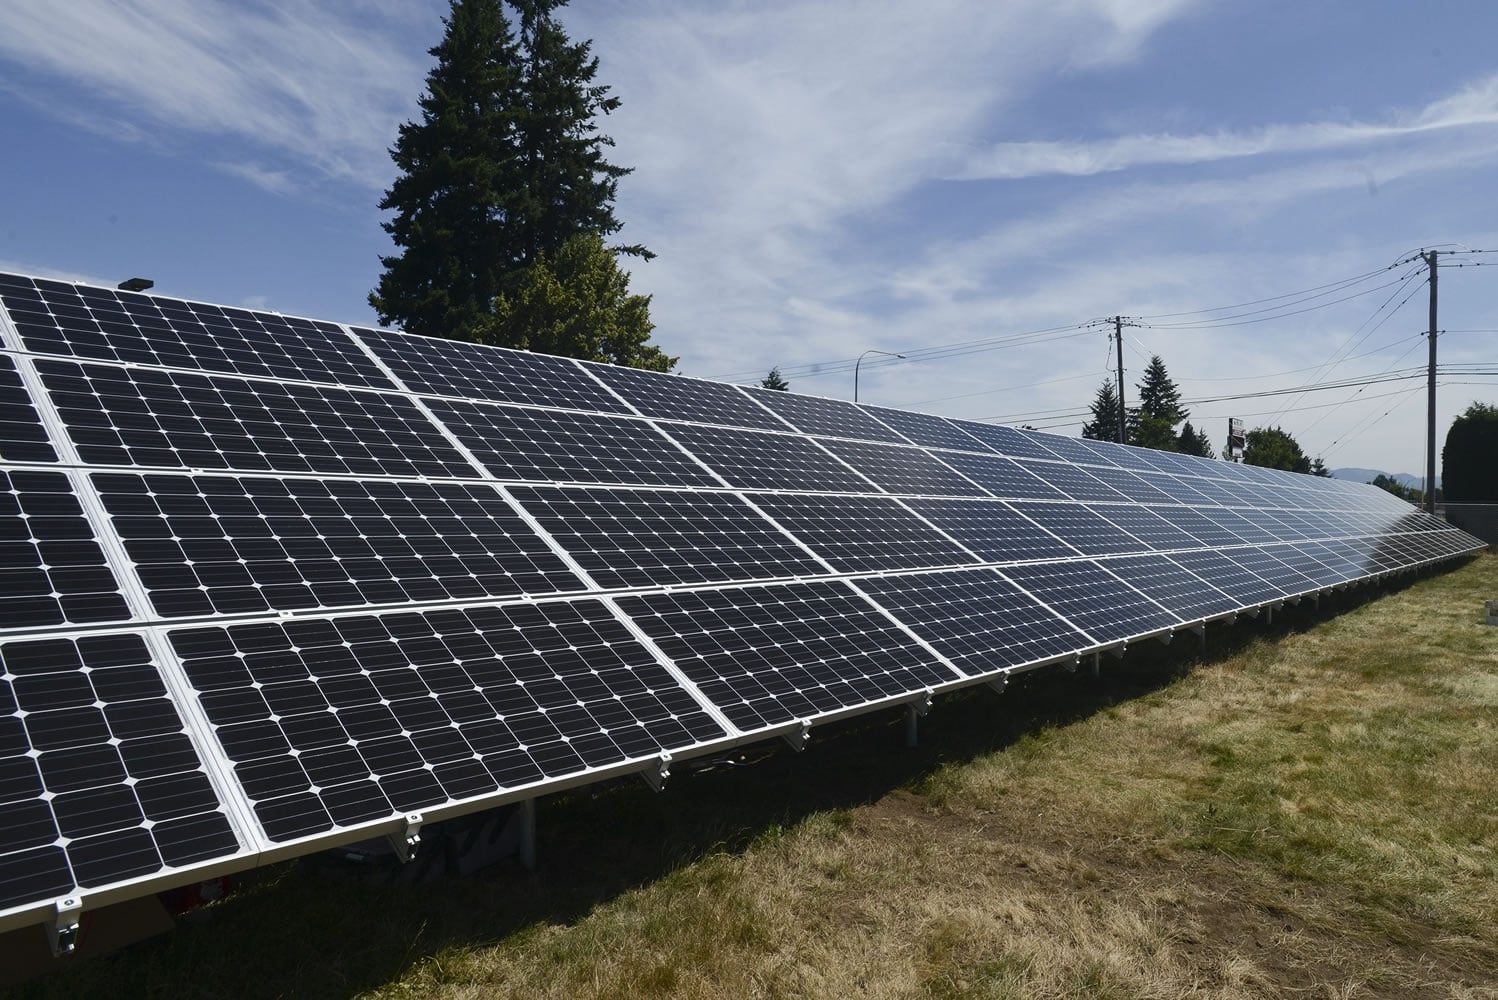 Clark Public Utilities has built its first community solar panel system outside its Orchards operations center.